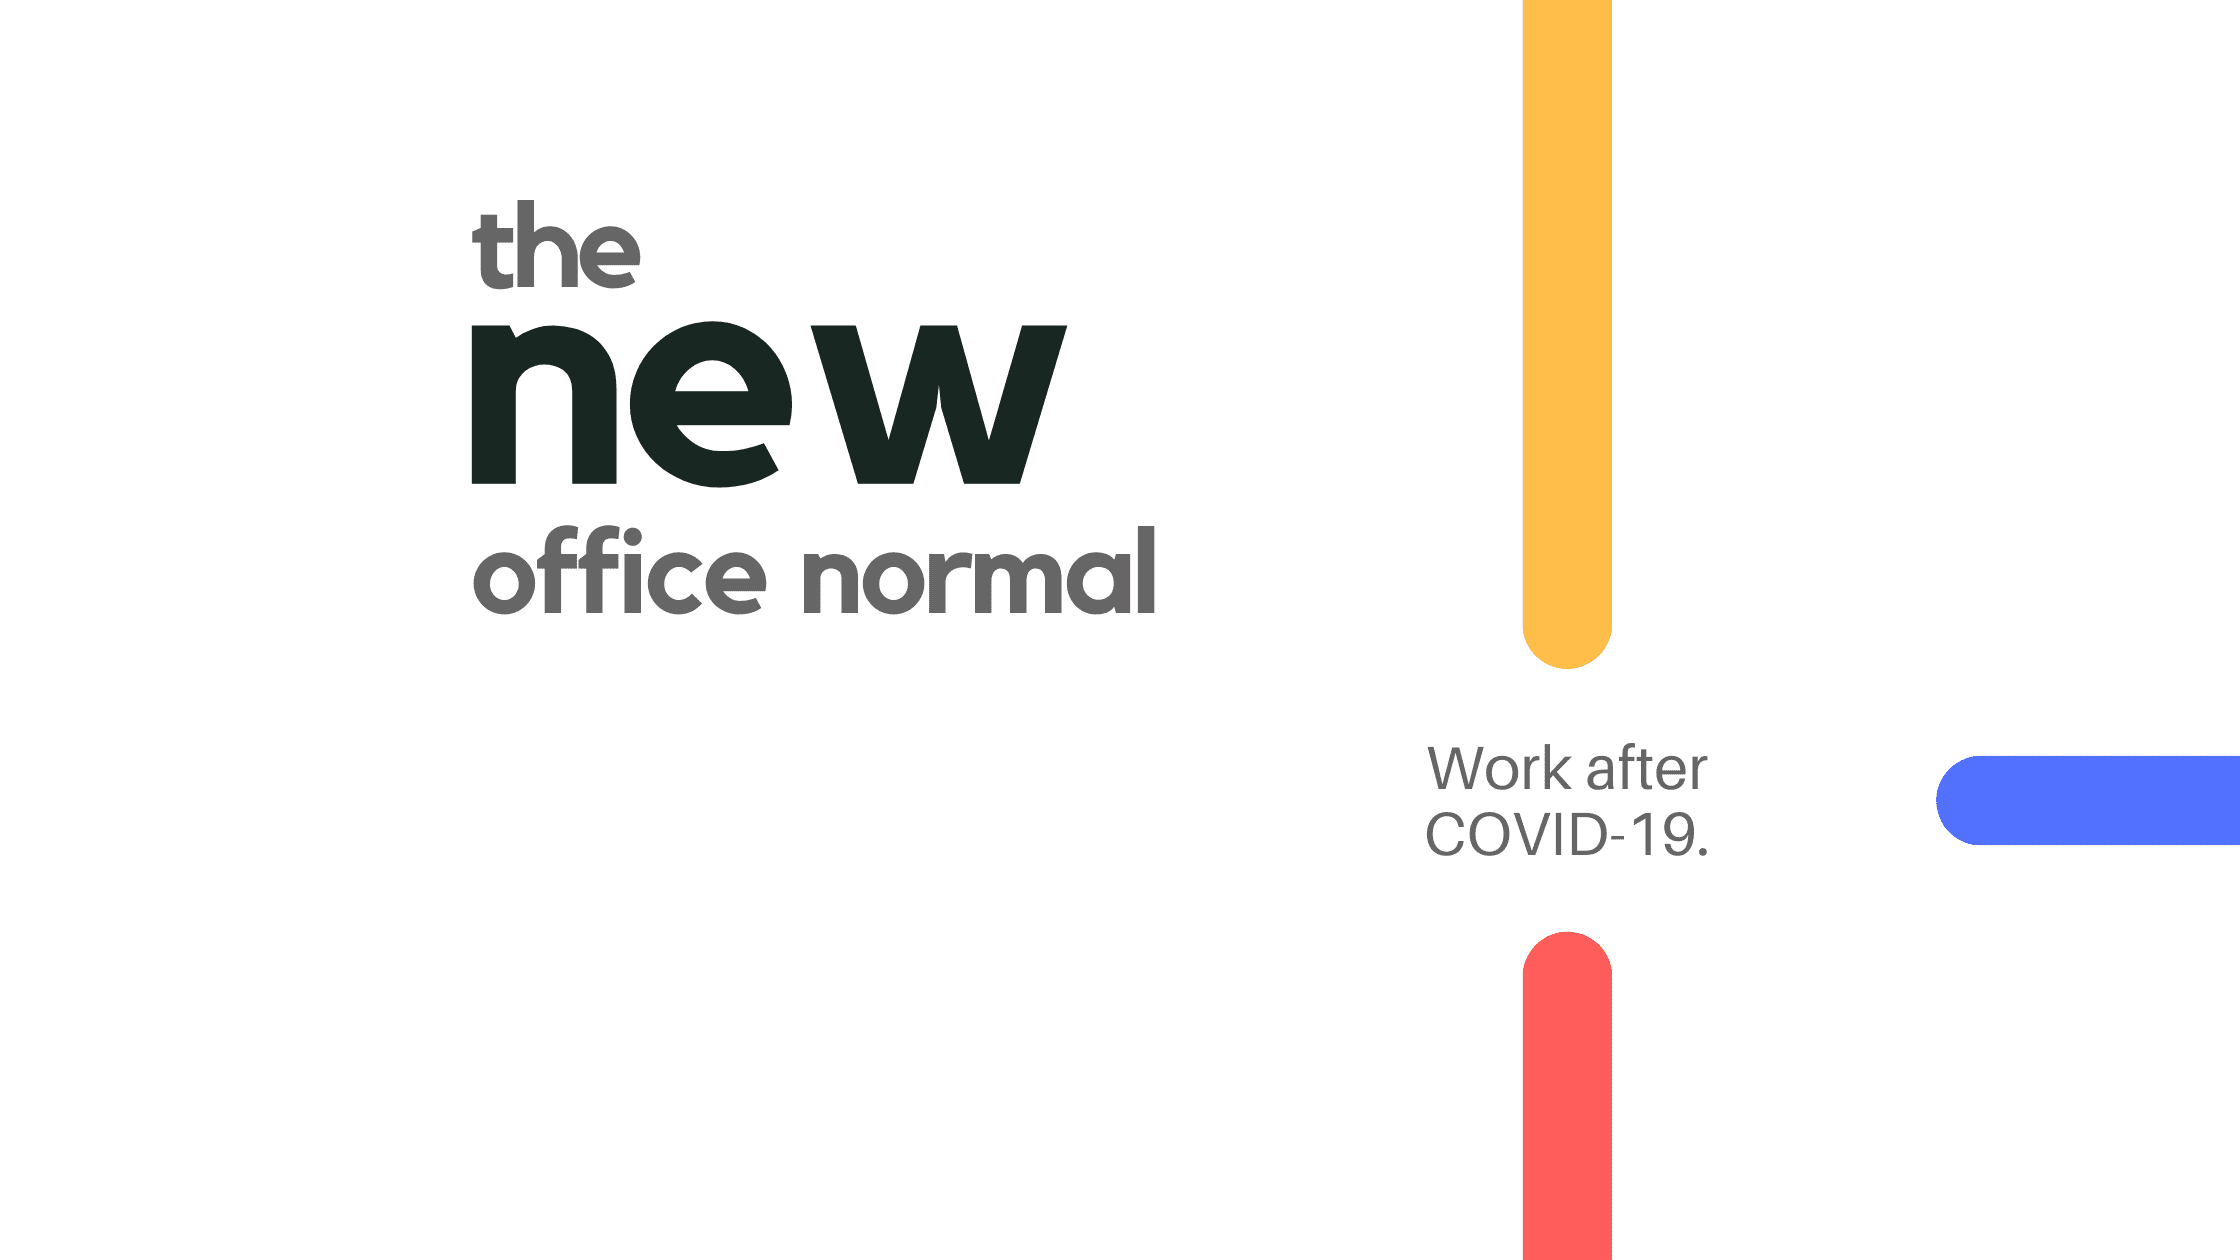 Work after COVID-19: A New Office Normal